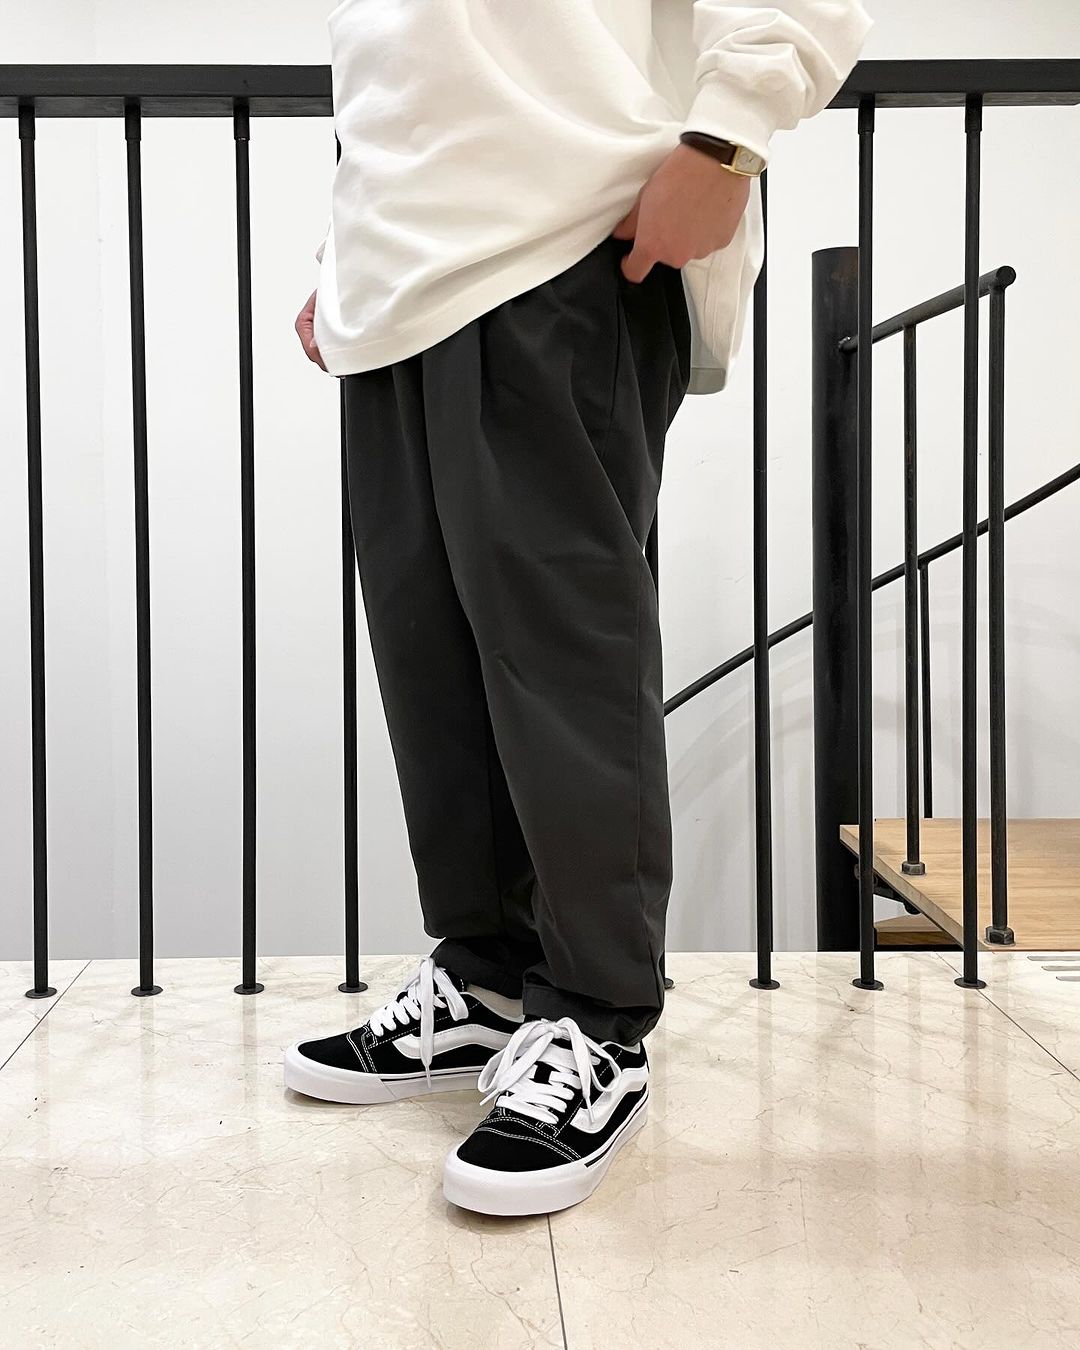 COOTIE PRODUCTIONS® / T/C 2 Tuck Easy Ankle Pants